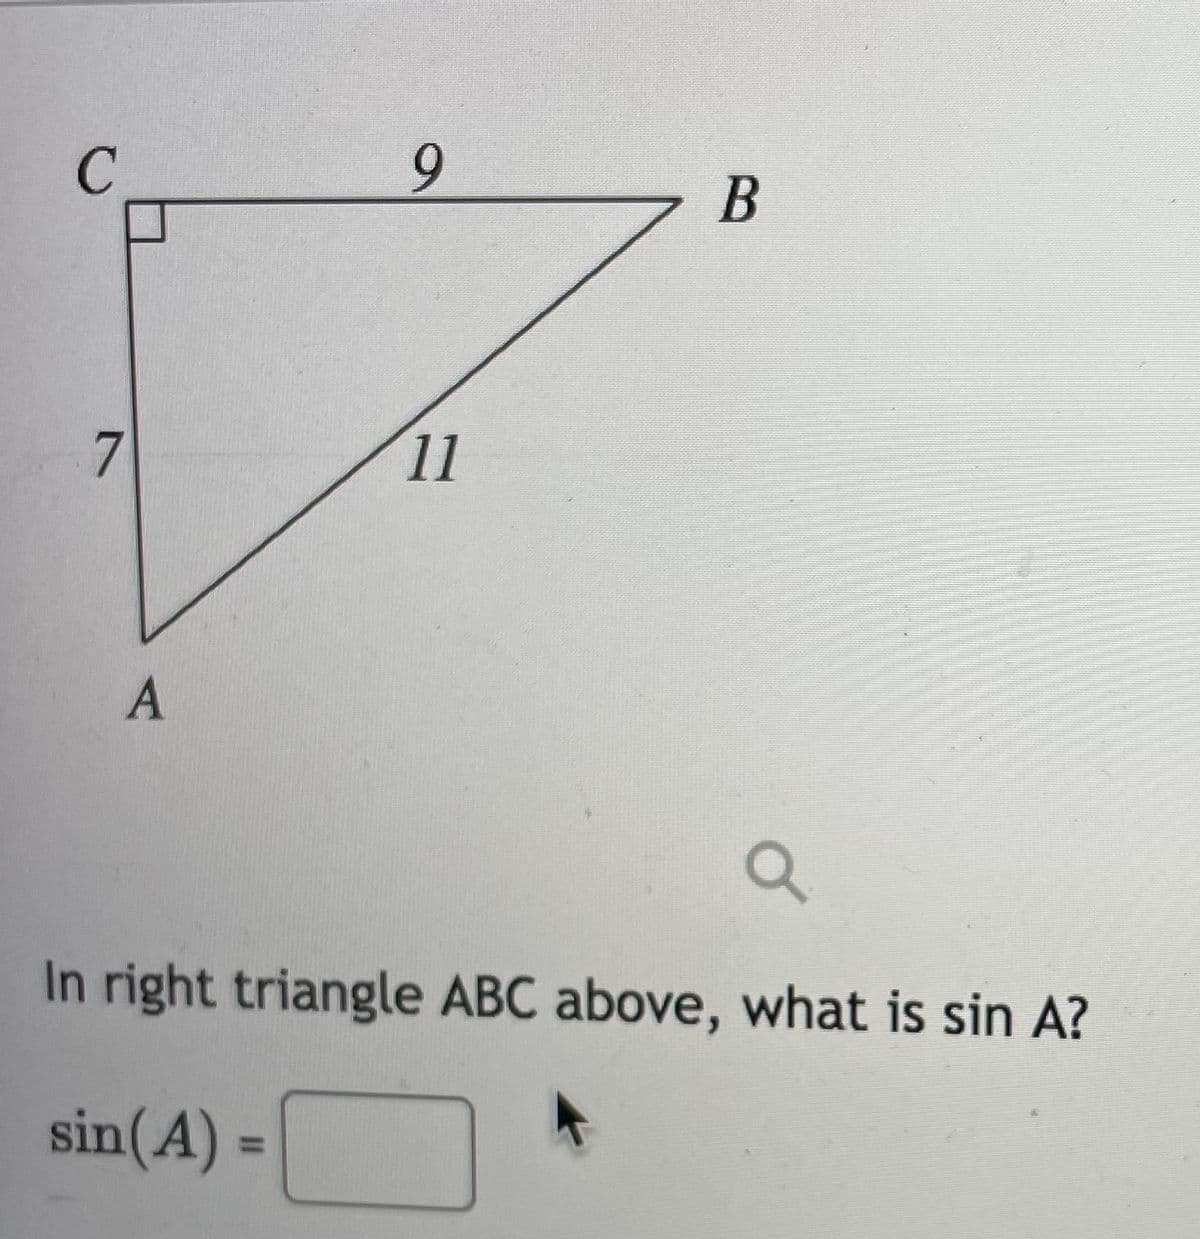 6.
В
11
In right triangle ABC above, what is sin A?
sin(A)
